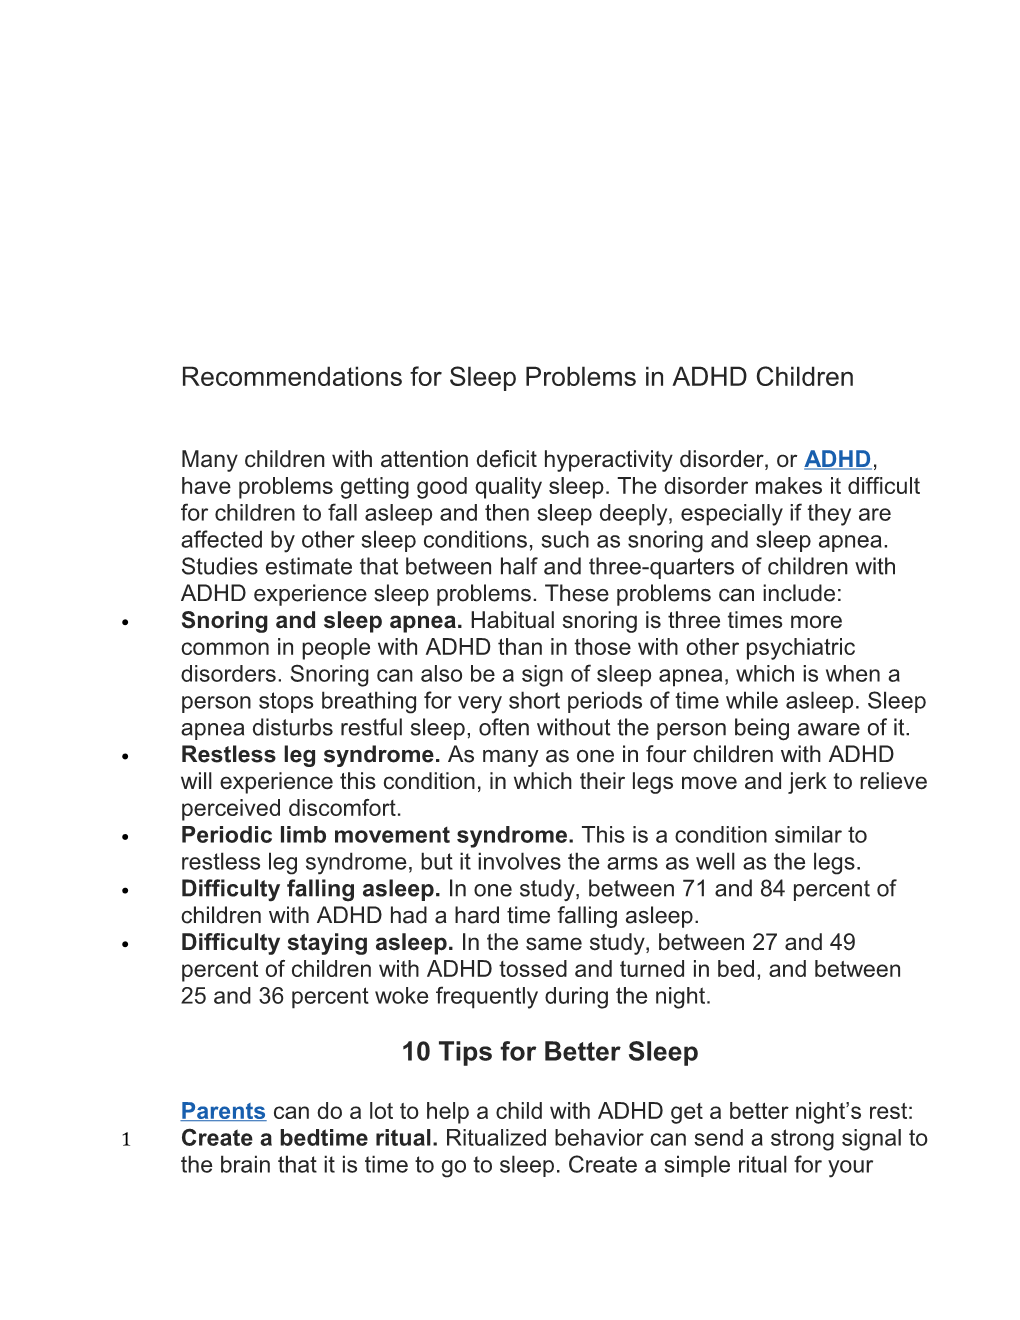 Recommendations for Sleep Problems in ADHD Children